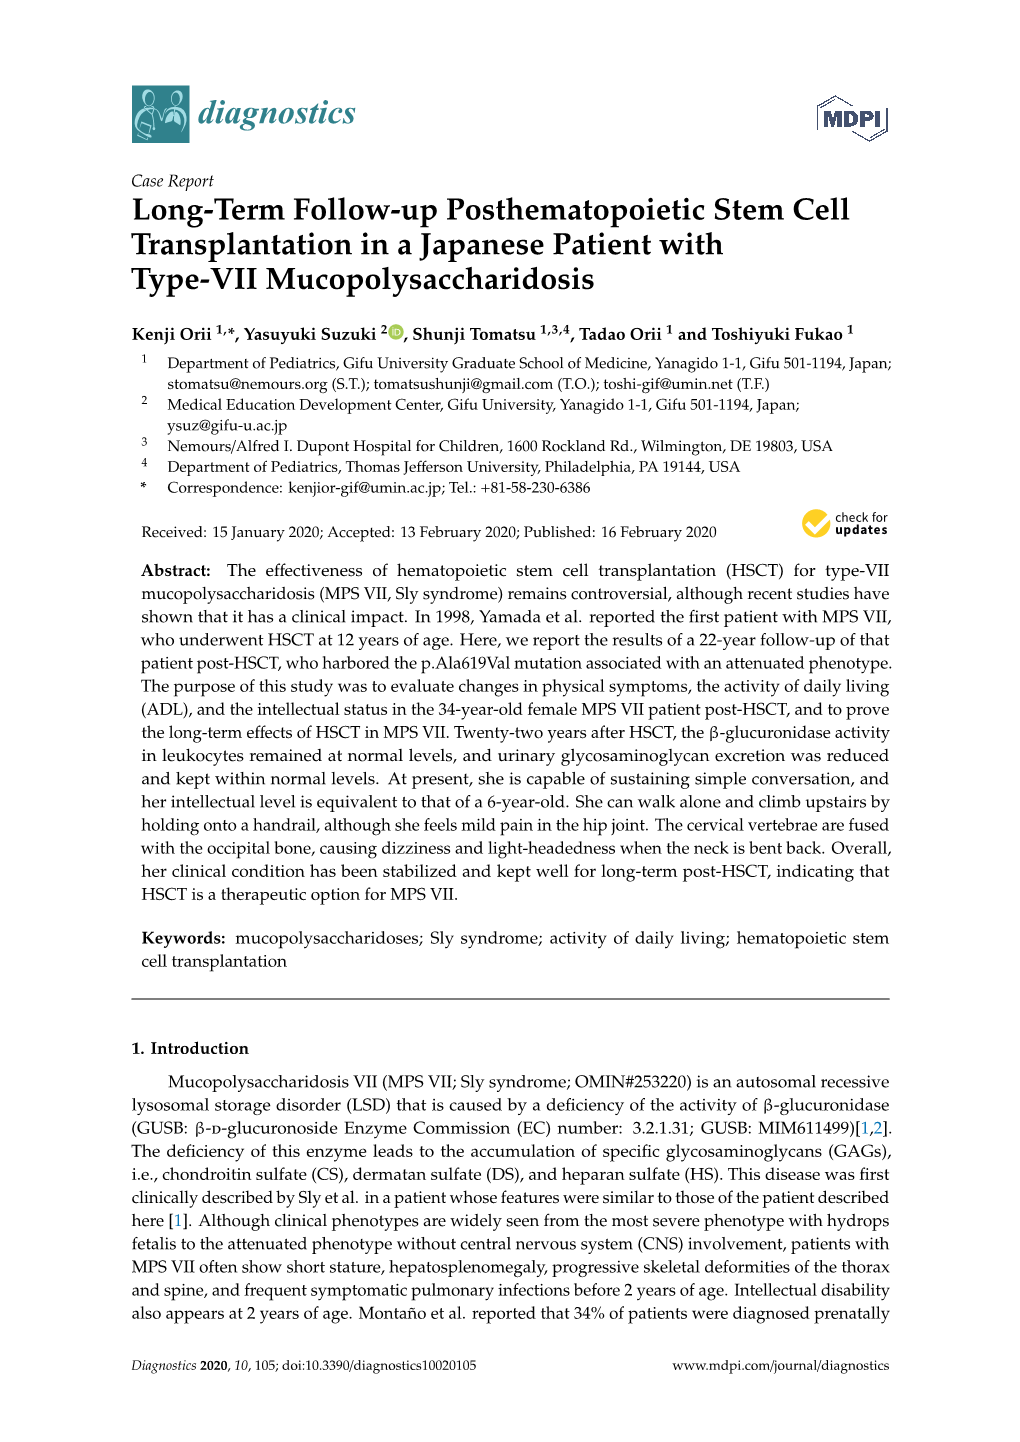 Long-Term Follow-Up Posthematopoietic Stem Cell Transplantation in a Japanese Patient with Type-VII Mucopolysaccharidosis